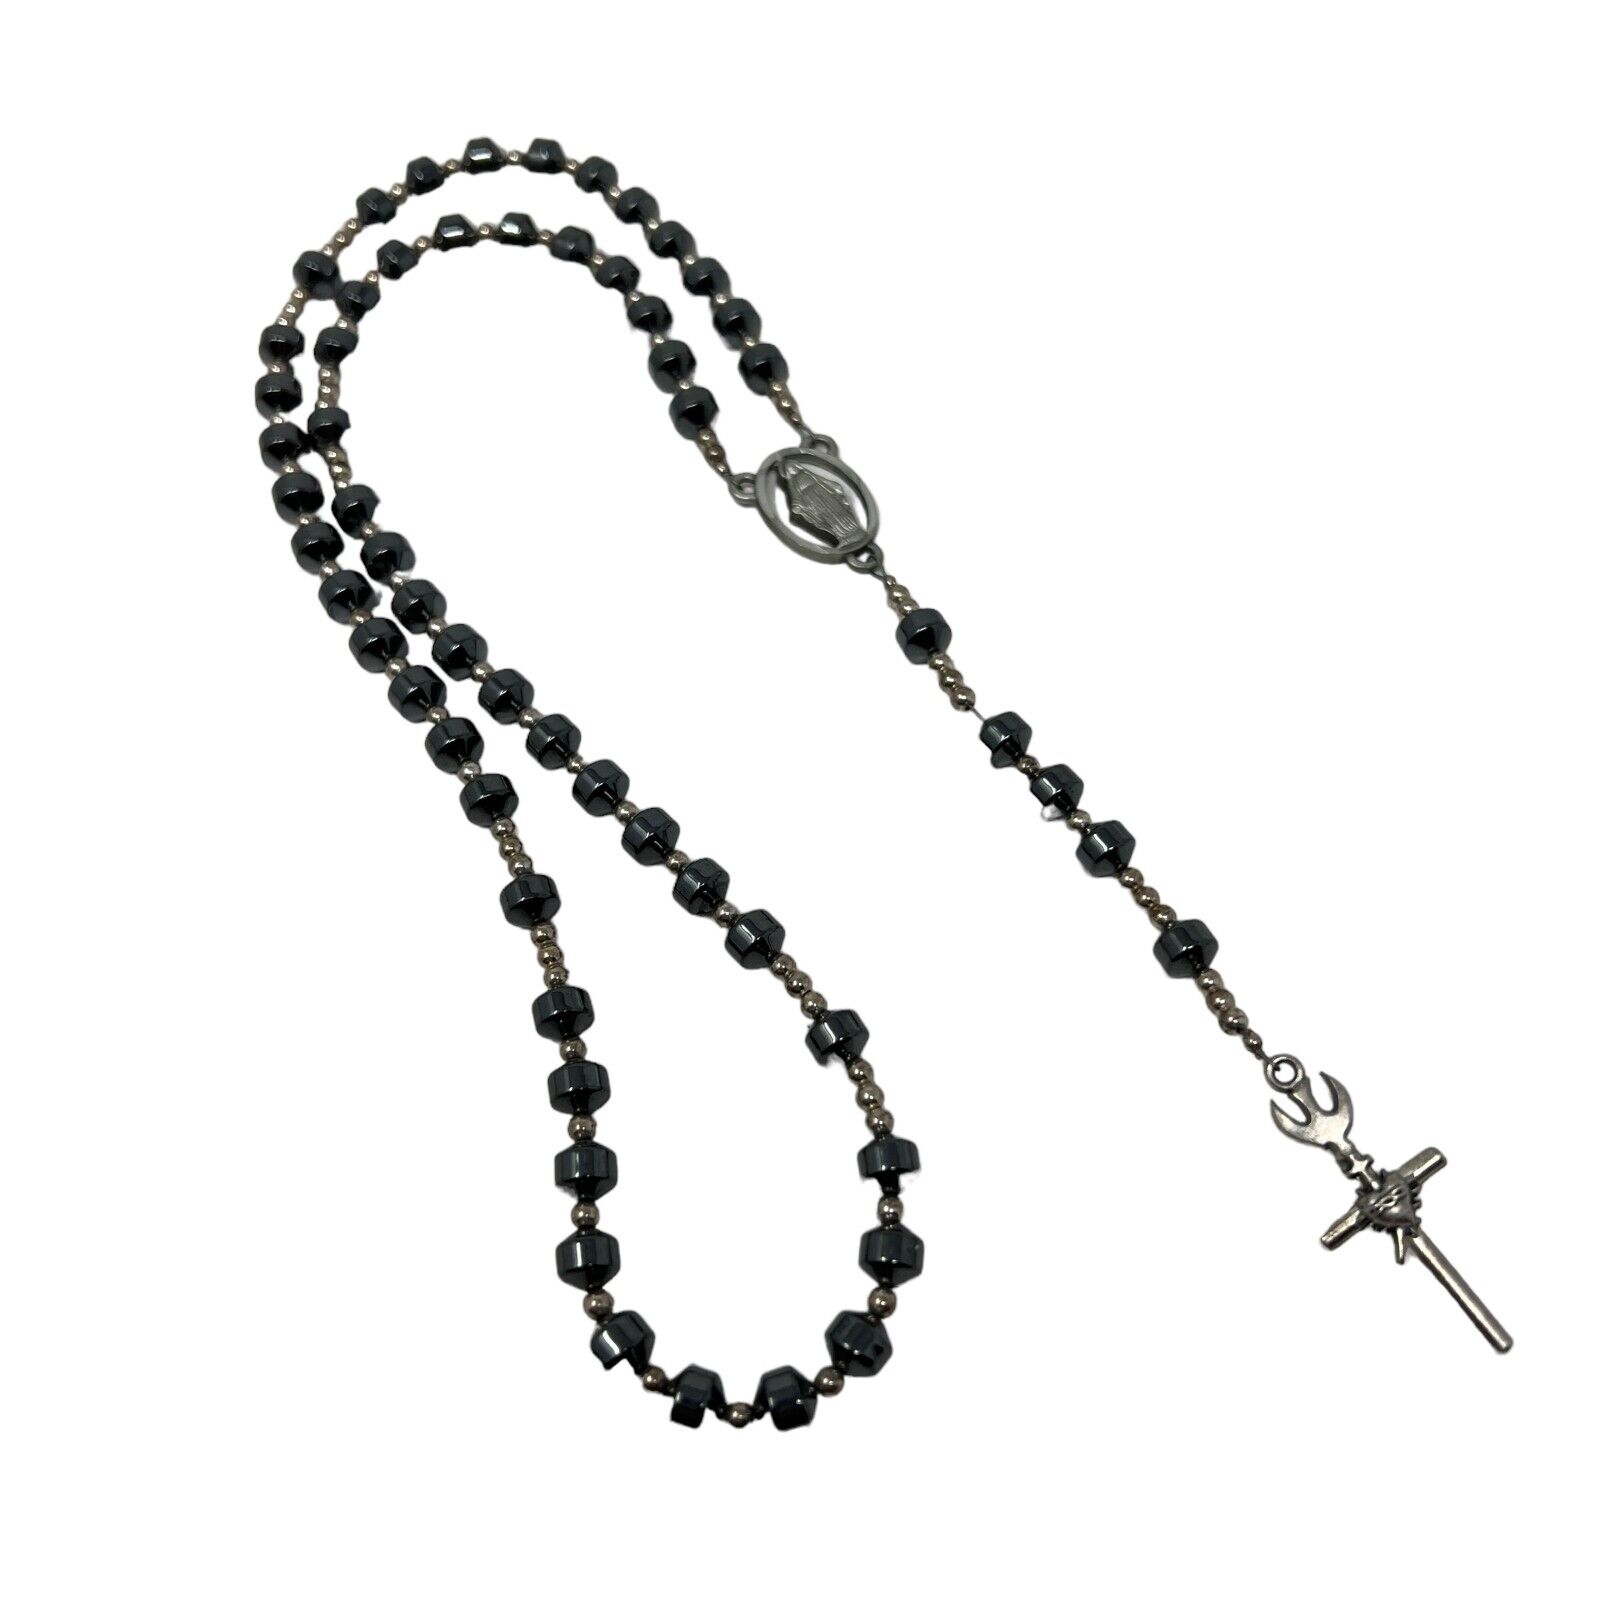 Vintage Rosary Hematite Stone Beads and Silver Tone Five Decade